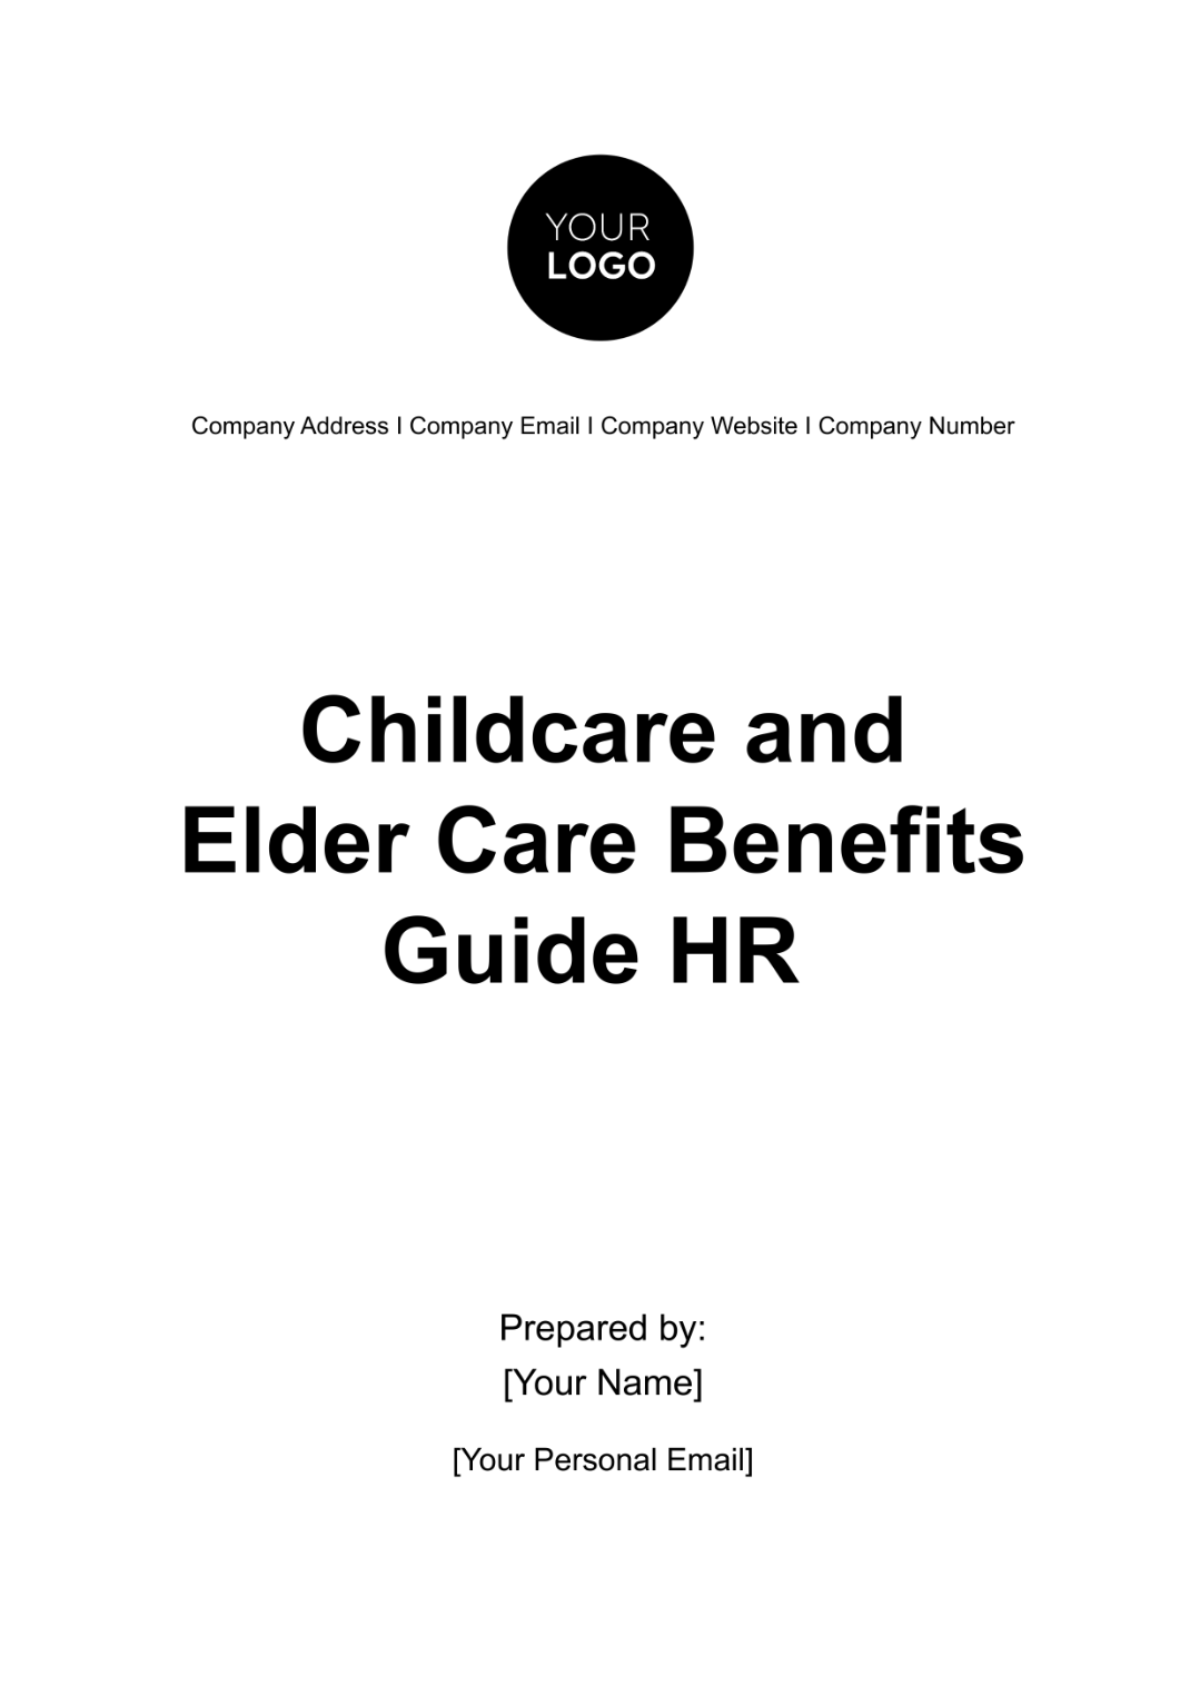 Free Childcare and Elder Care Benefits Guide HR Template